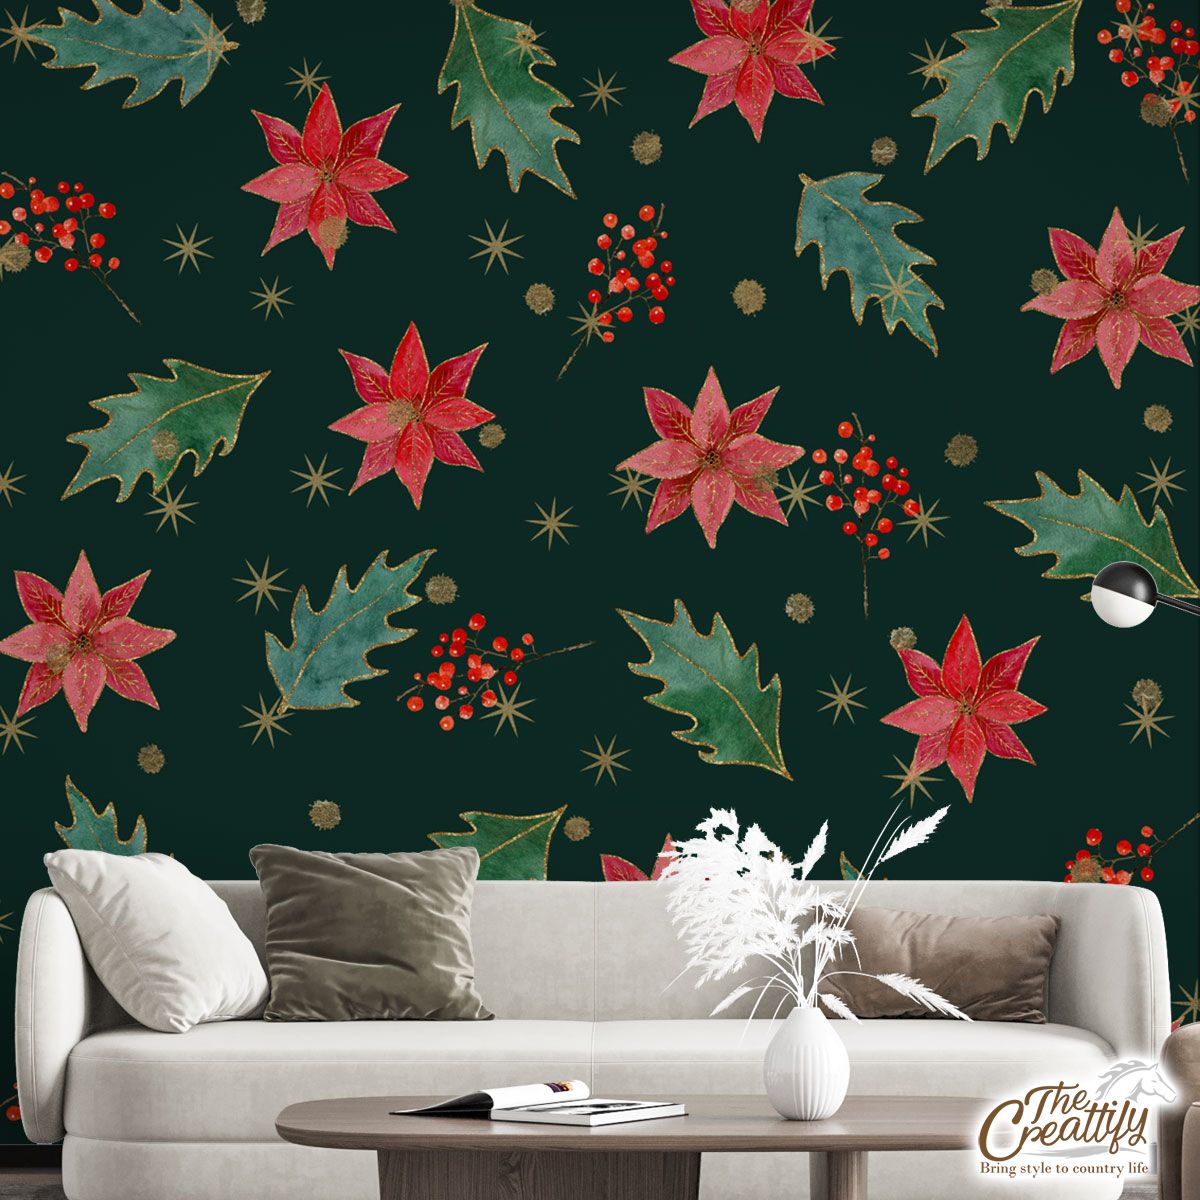 Poinsettias For Christmas And Holly Leaf Pattern Wall Mural